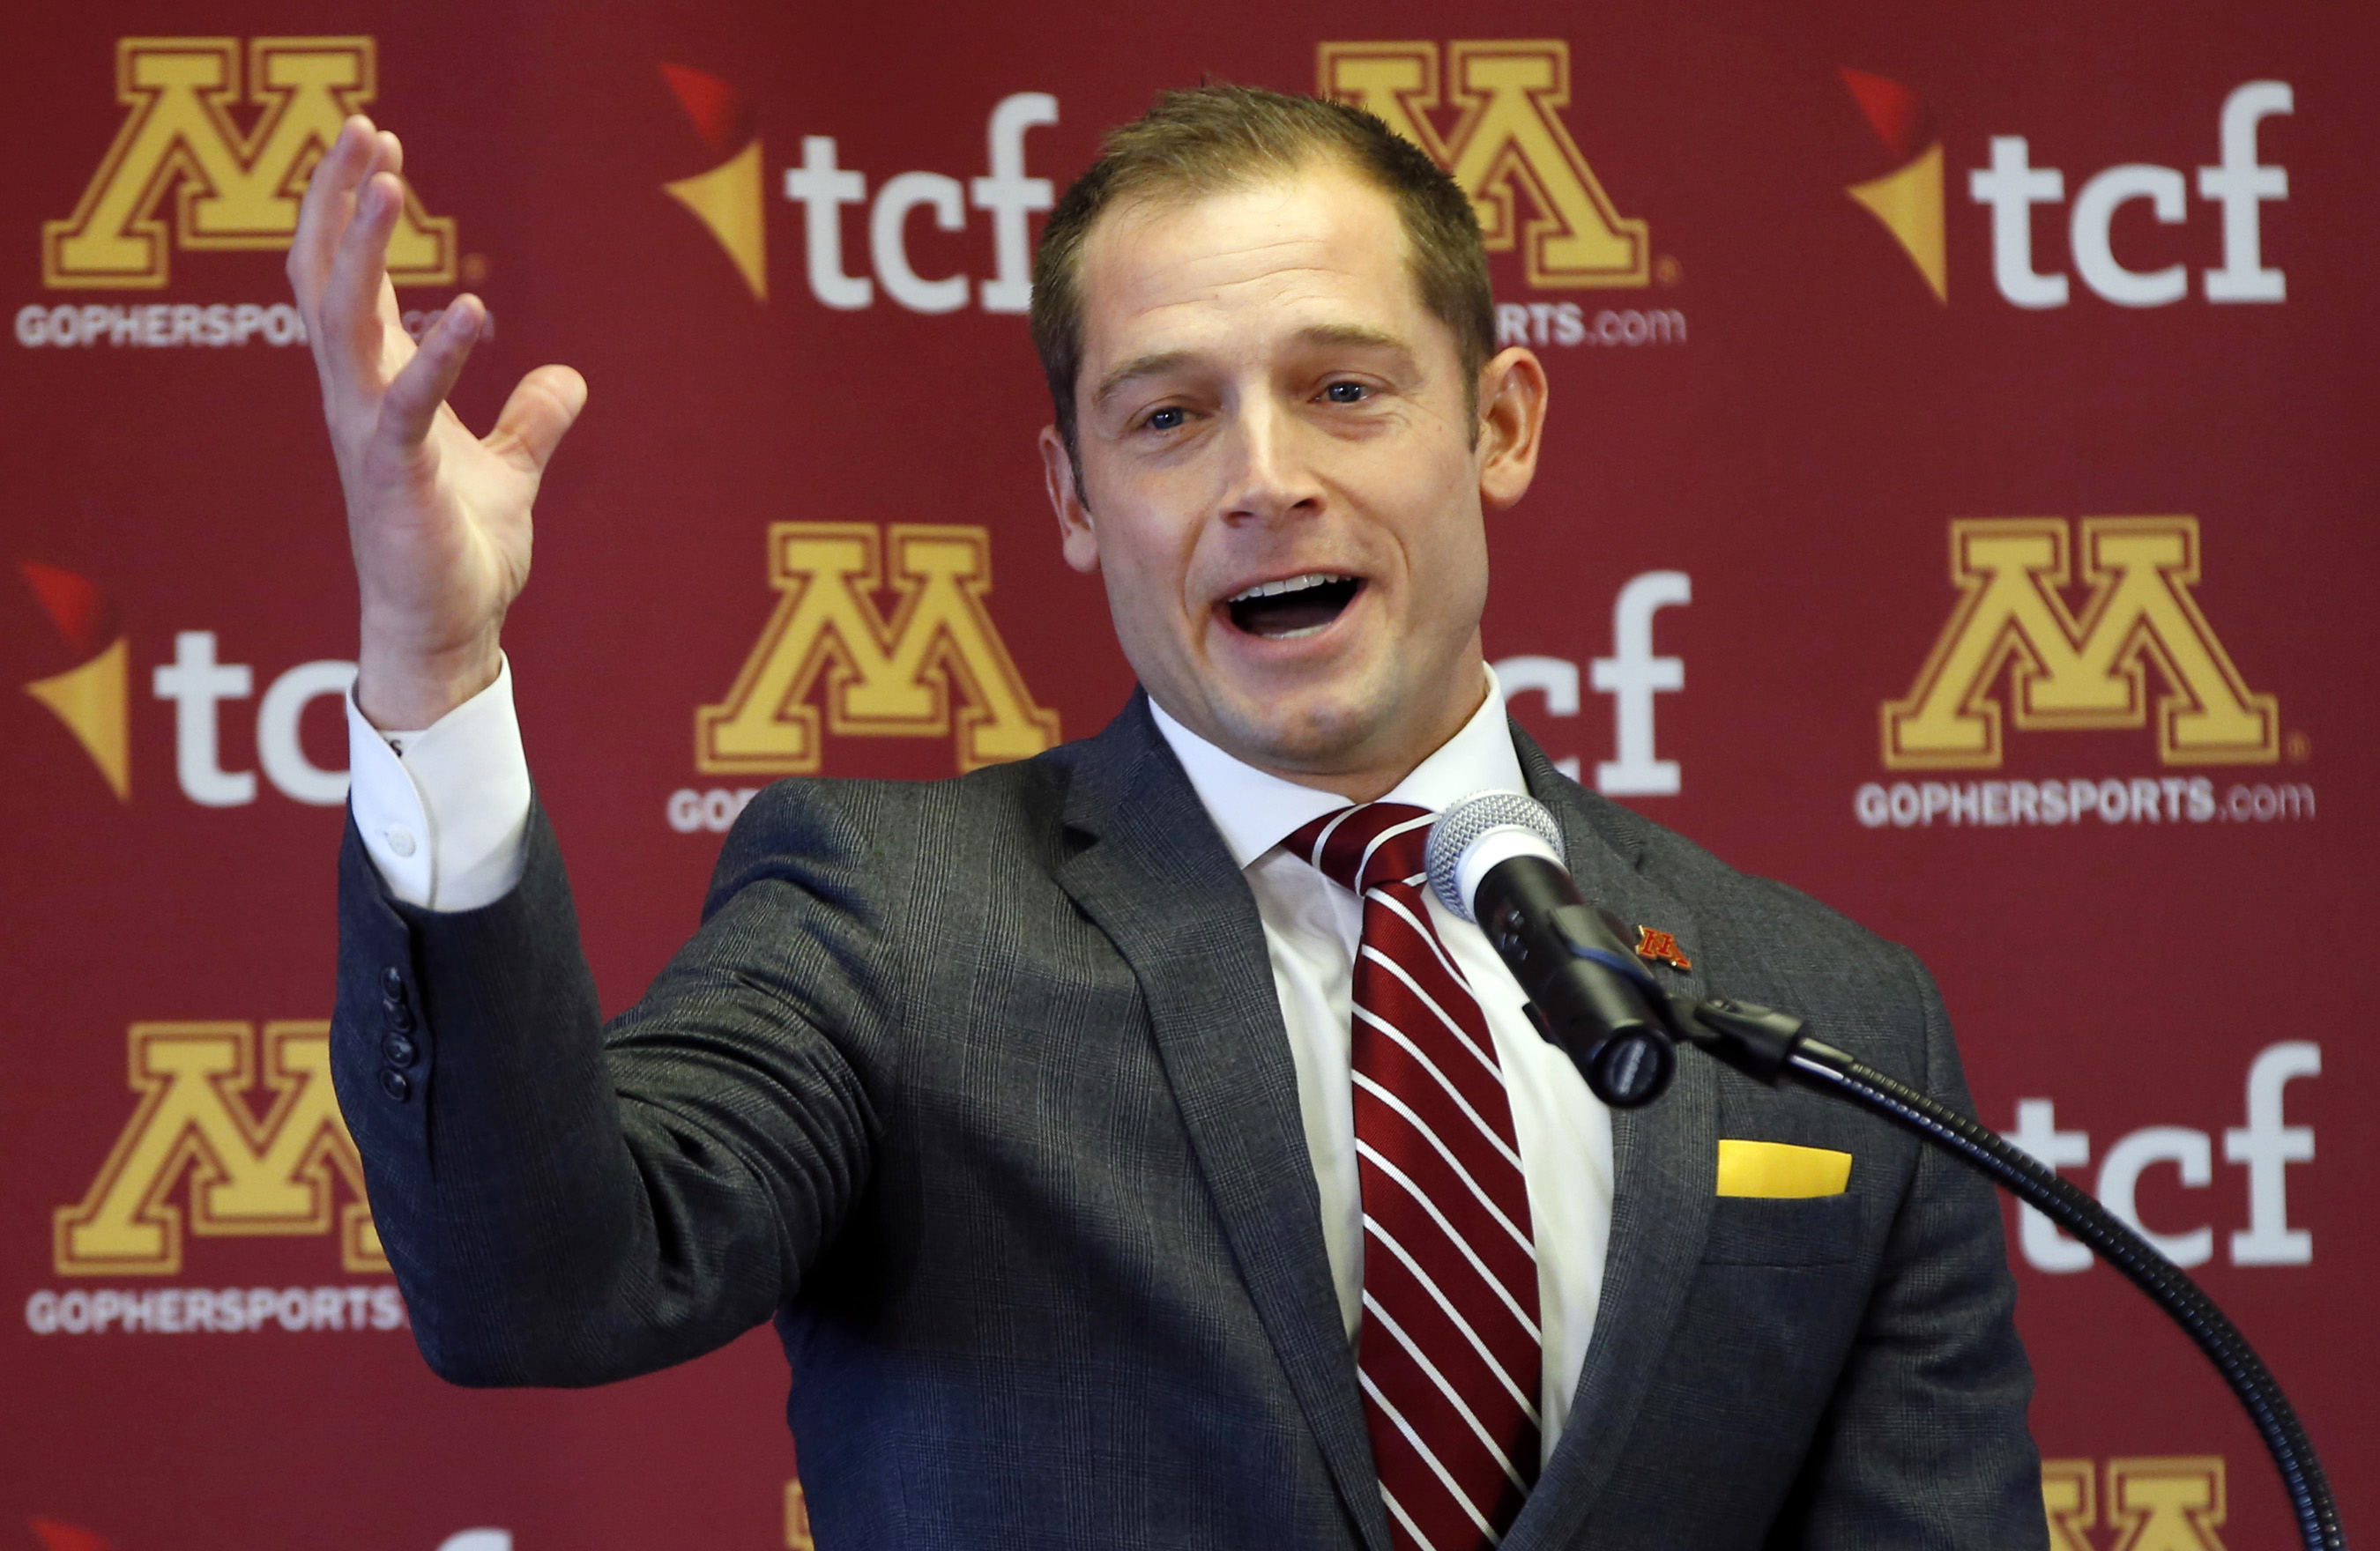 New University of Minnesota head football coach addresses the media after he was introduced during a news conference Friday, Jan. 6, 2017, in Minneapolis. AP Photo | Jim Mone.